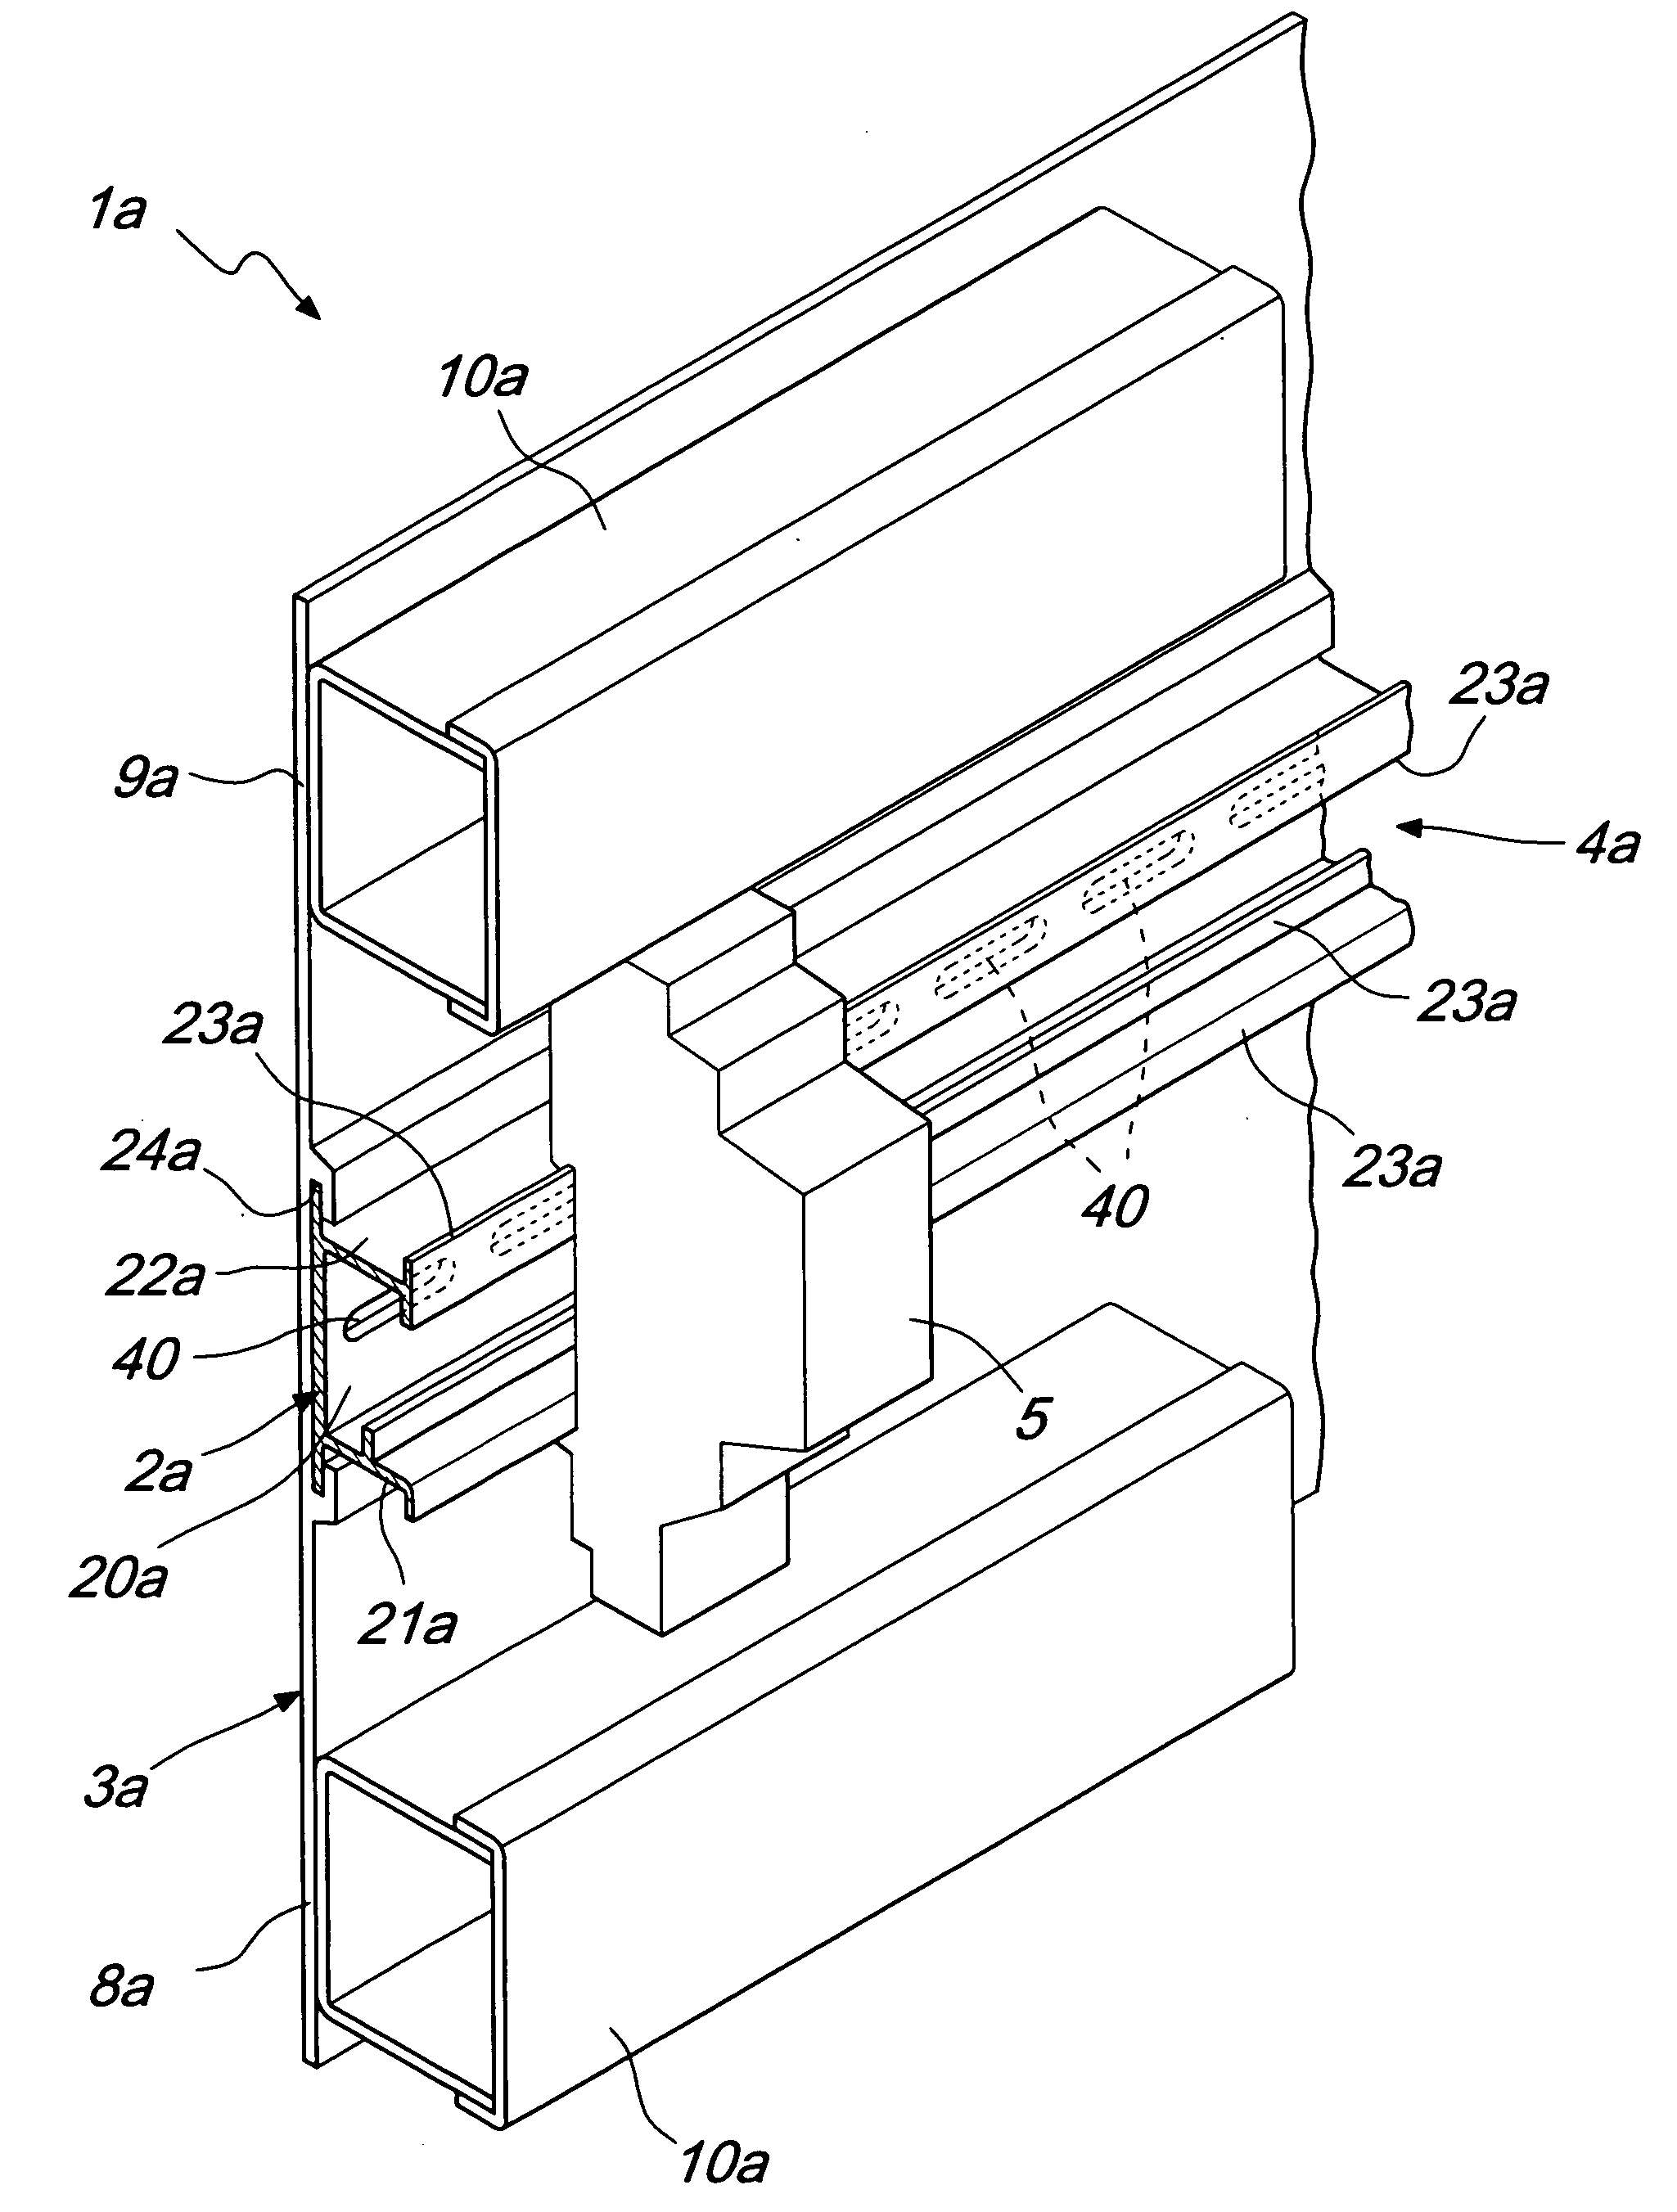 Device for supporting electrical components and wiring accessories